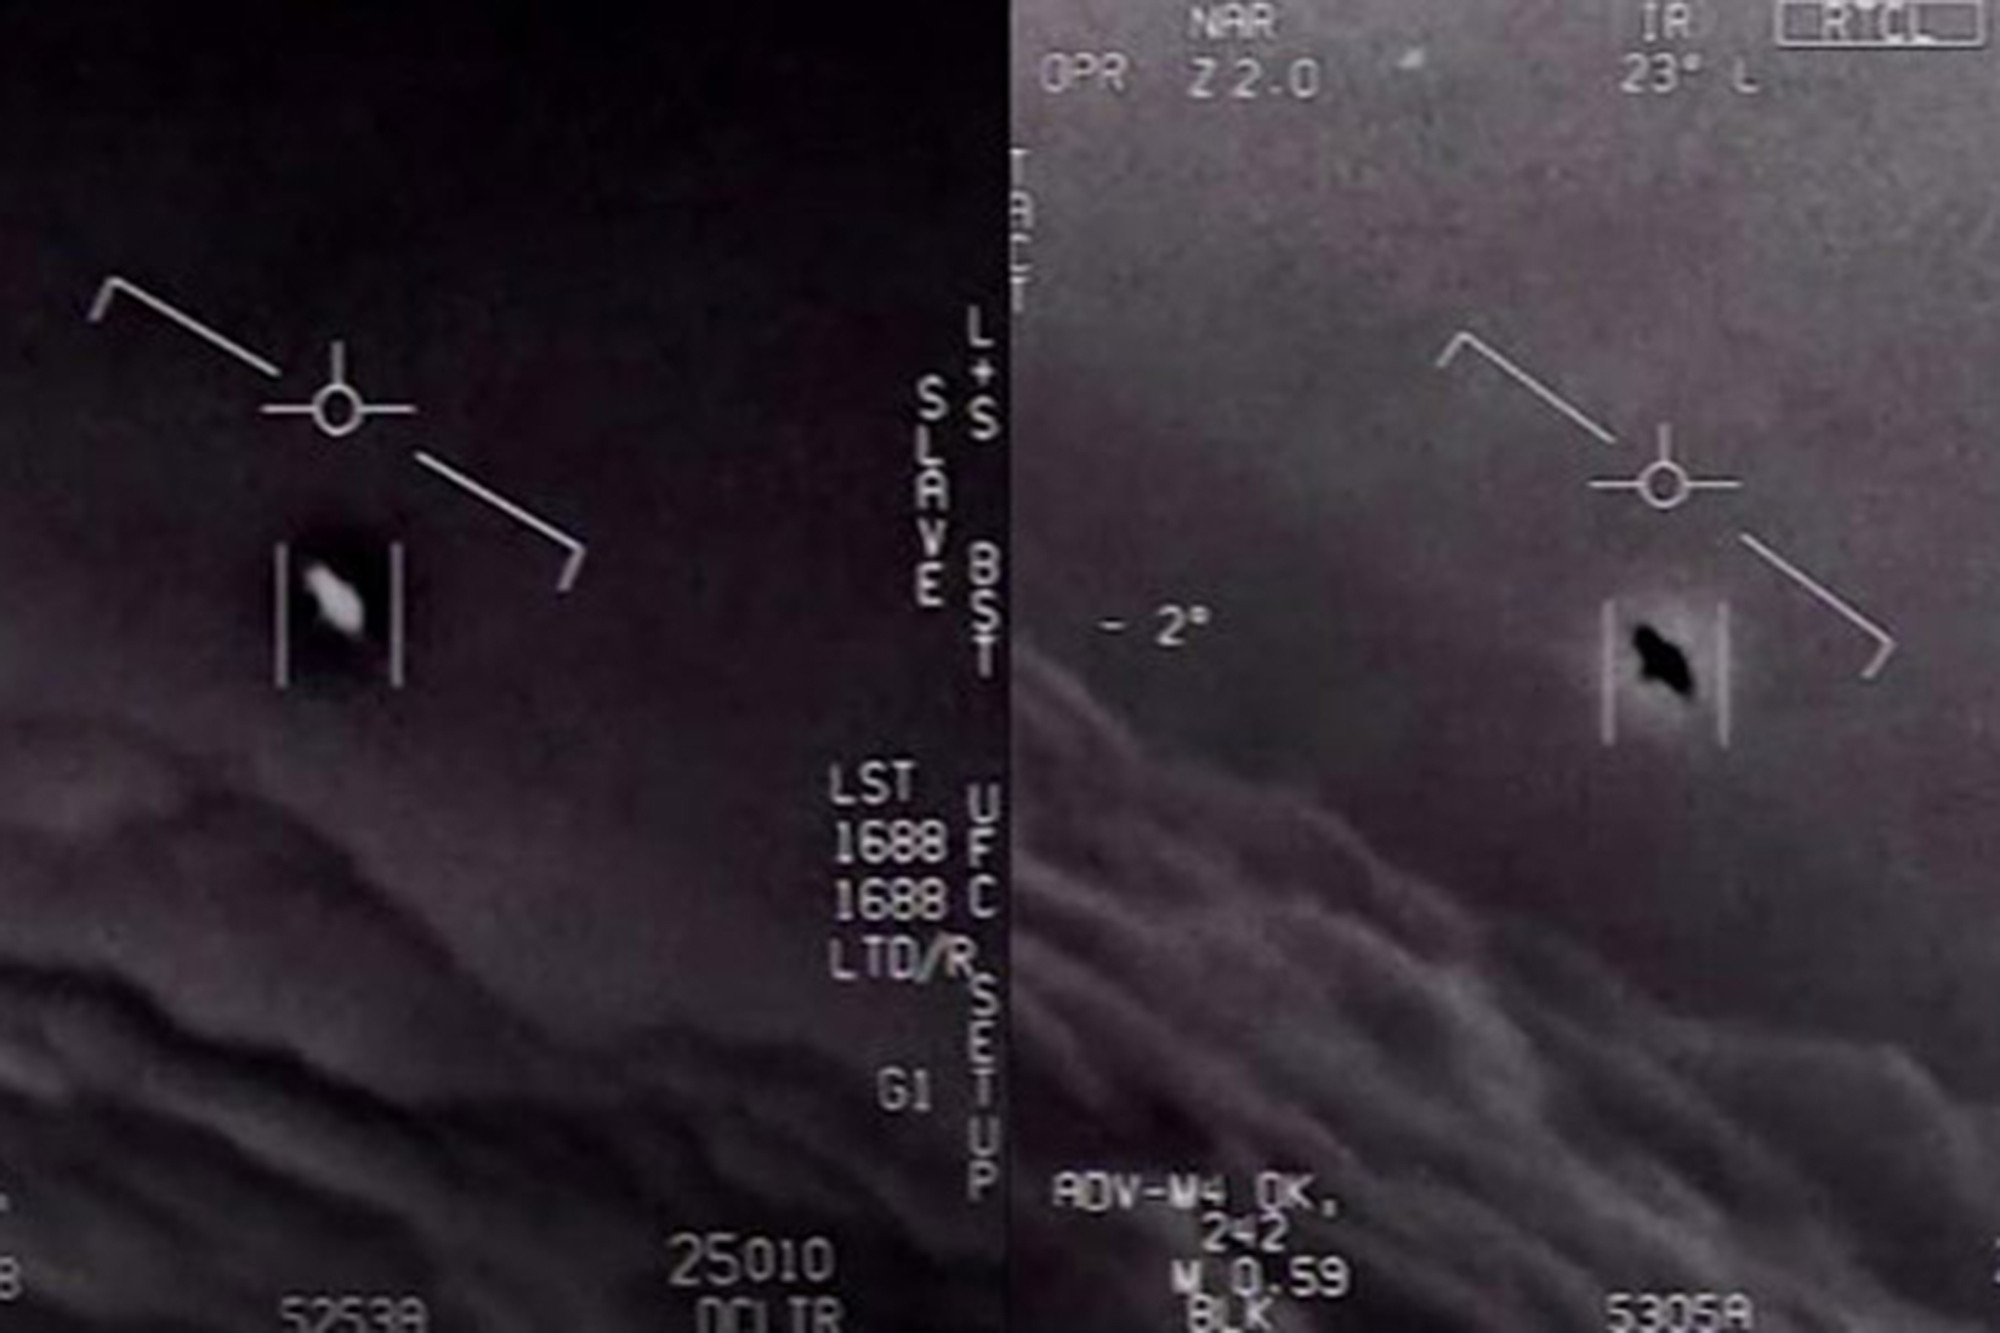 Department of Defense publicly releases 'unidentified aerial phenomena' videos